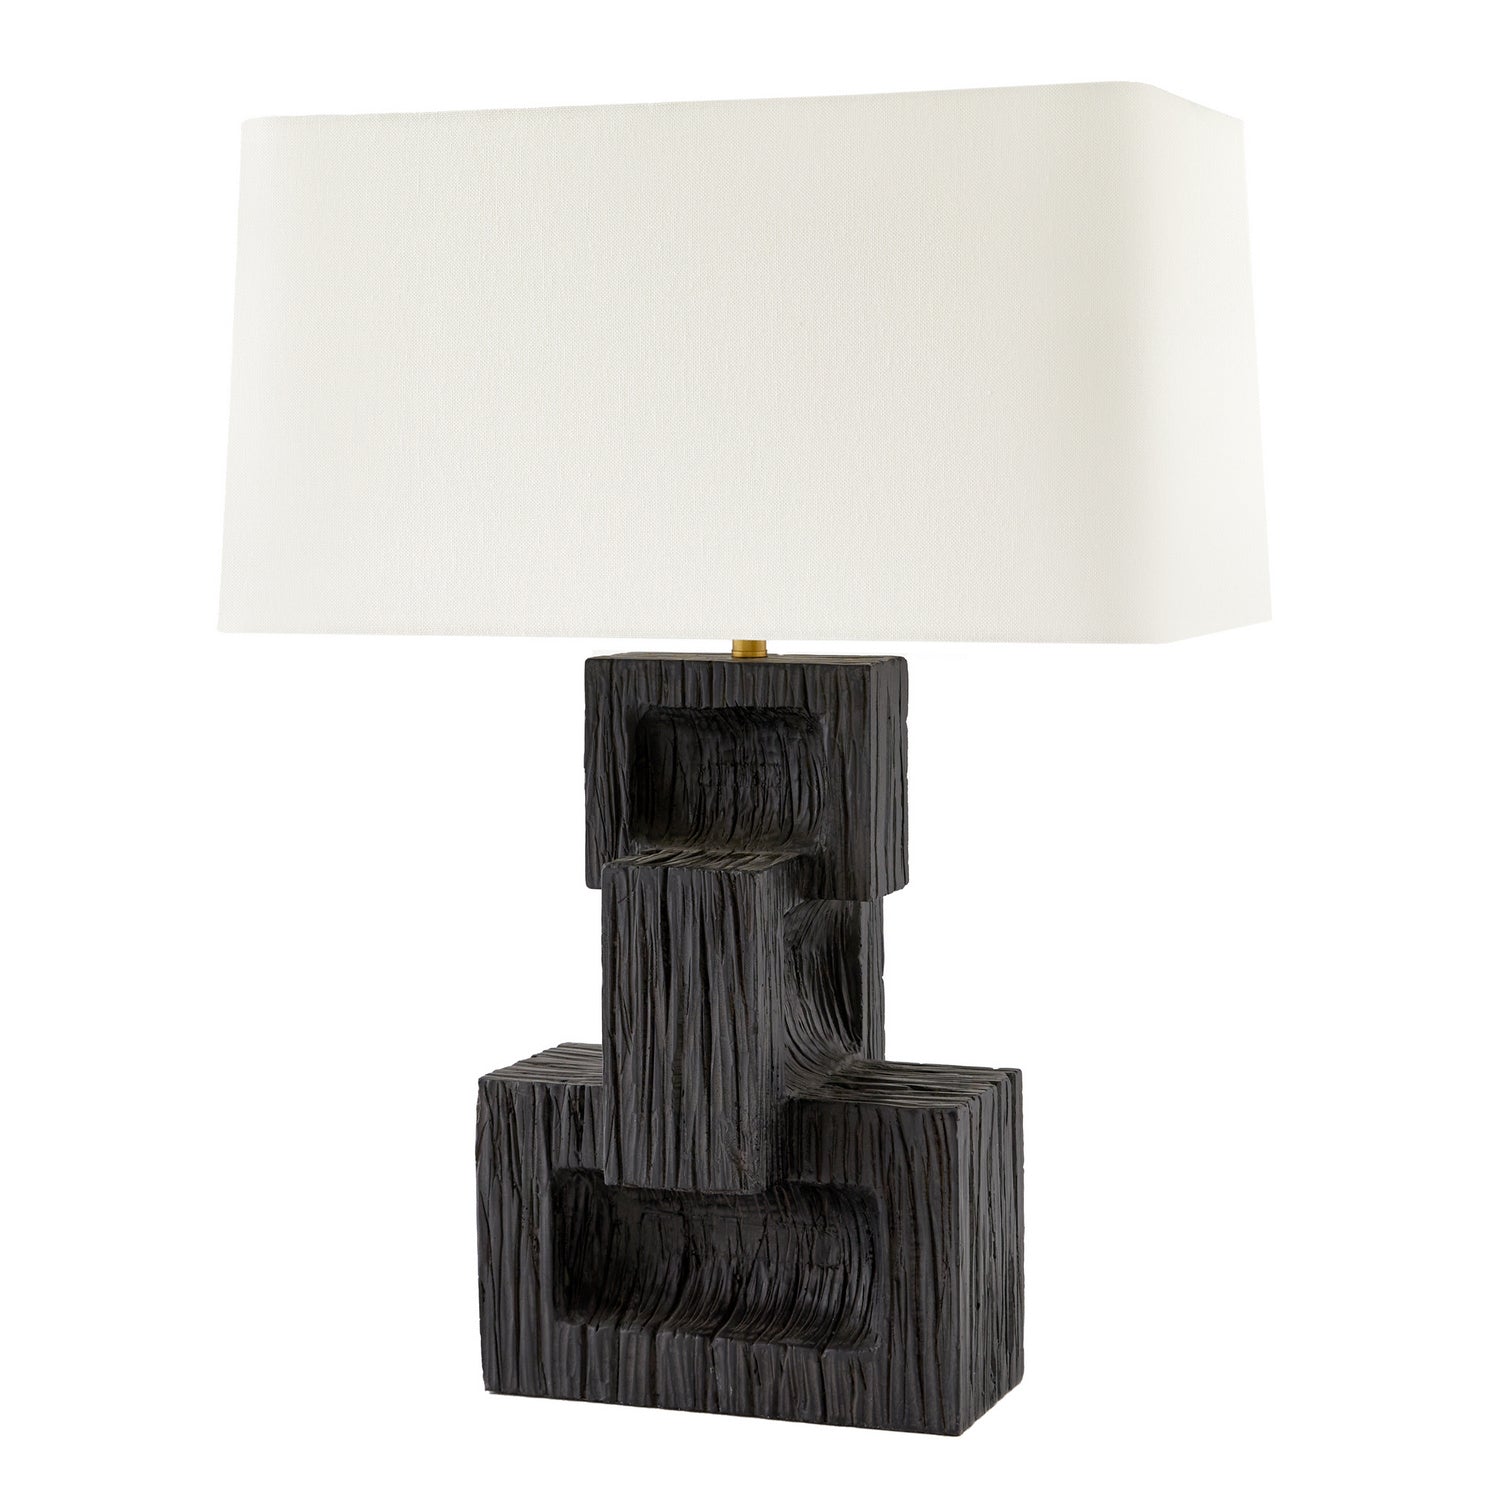 One Light Table Lamp from the Rendor collection in Ebony finish